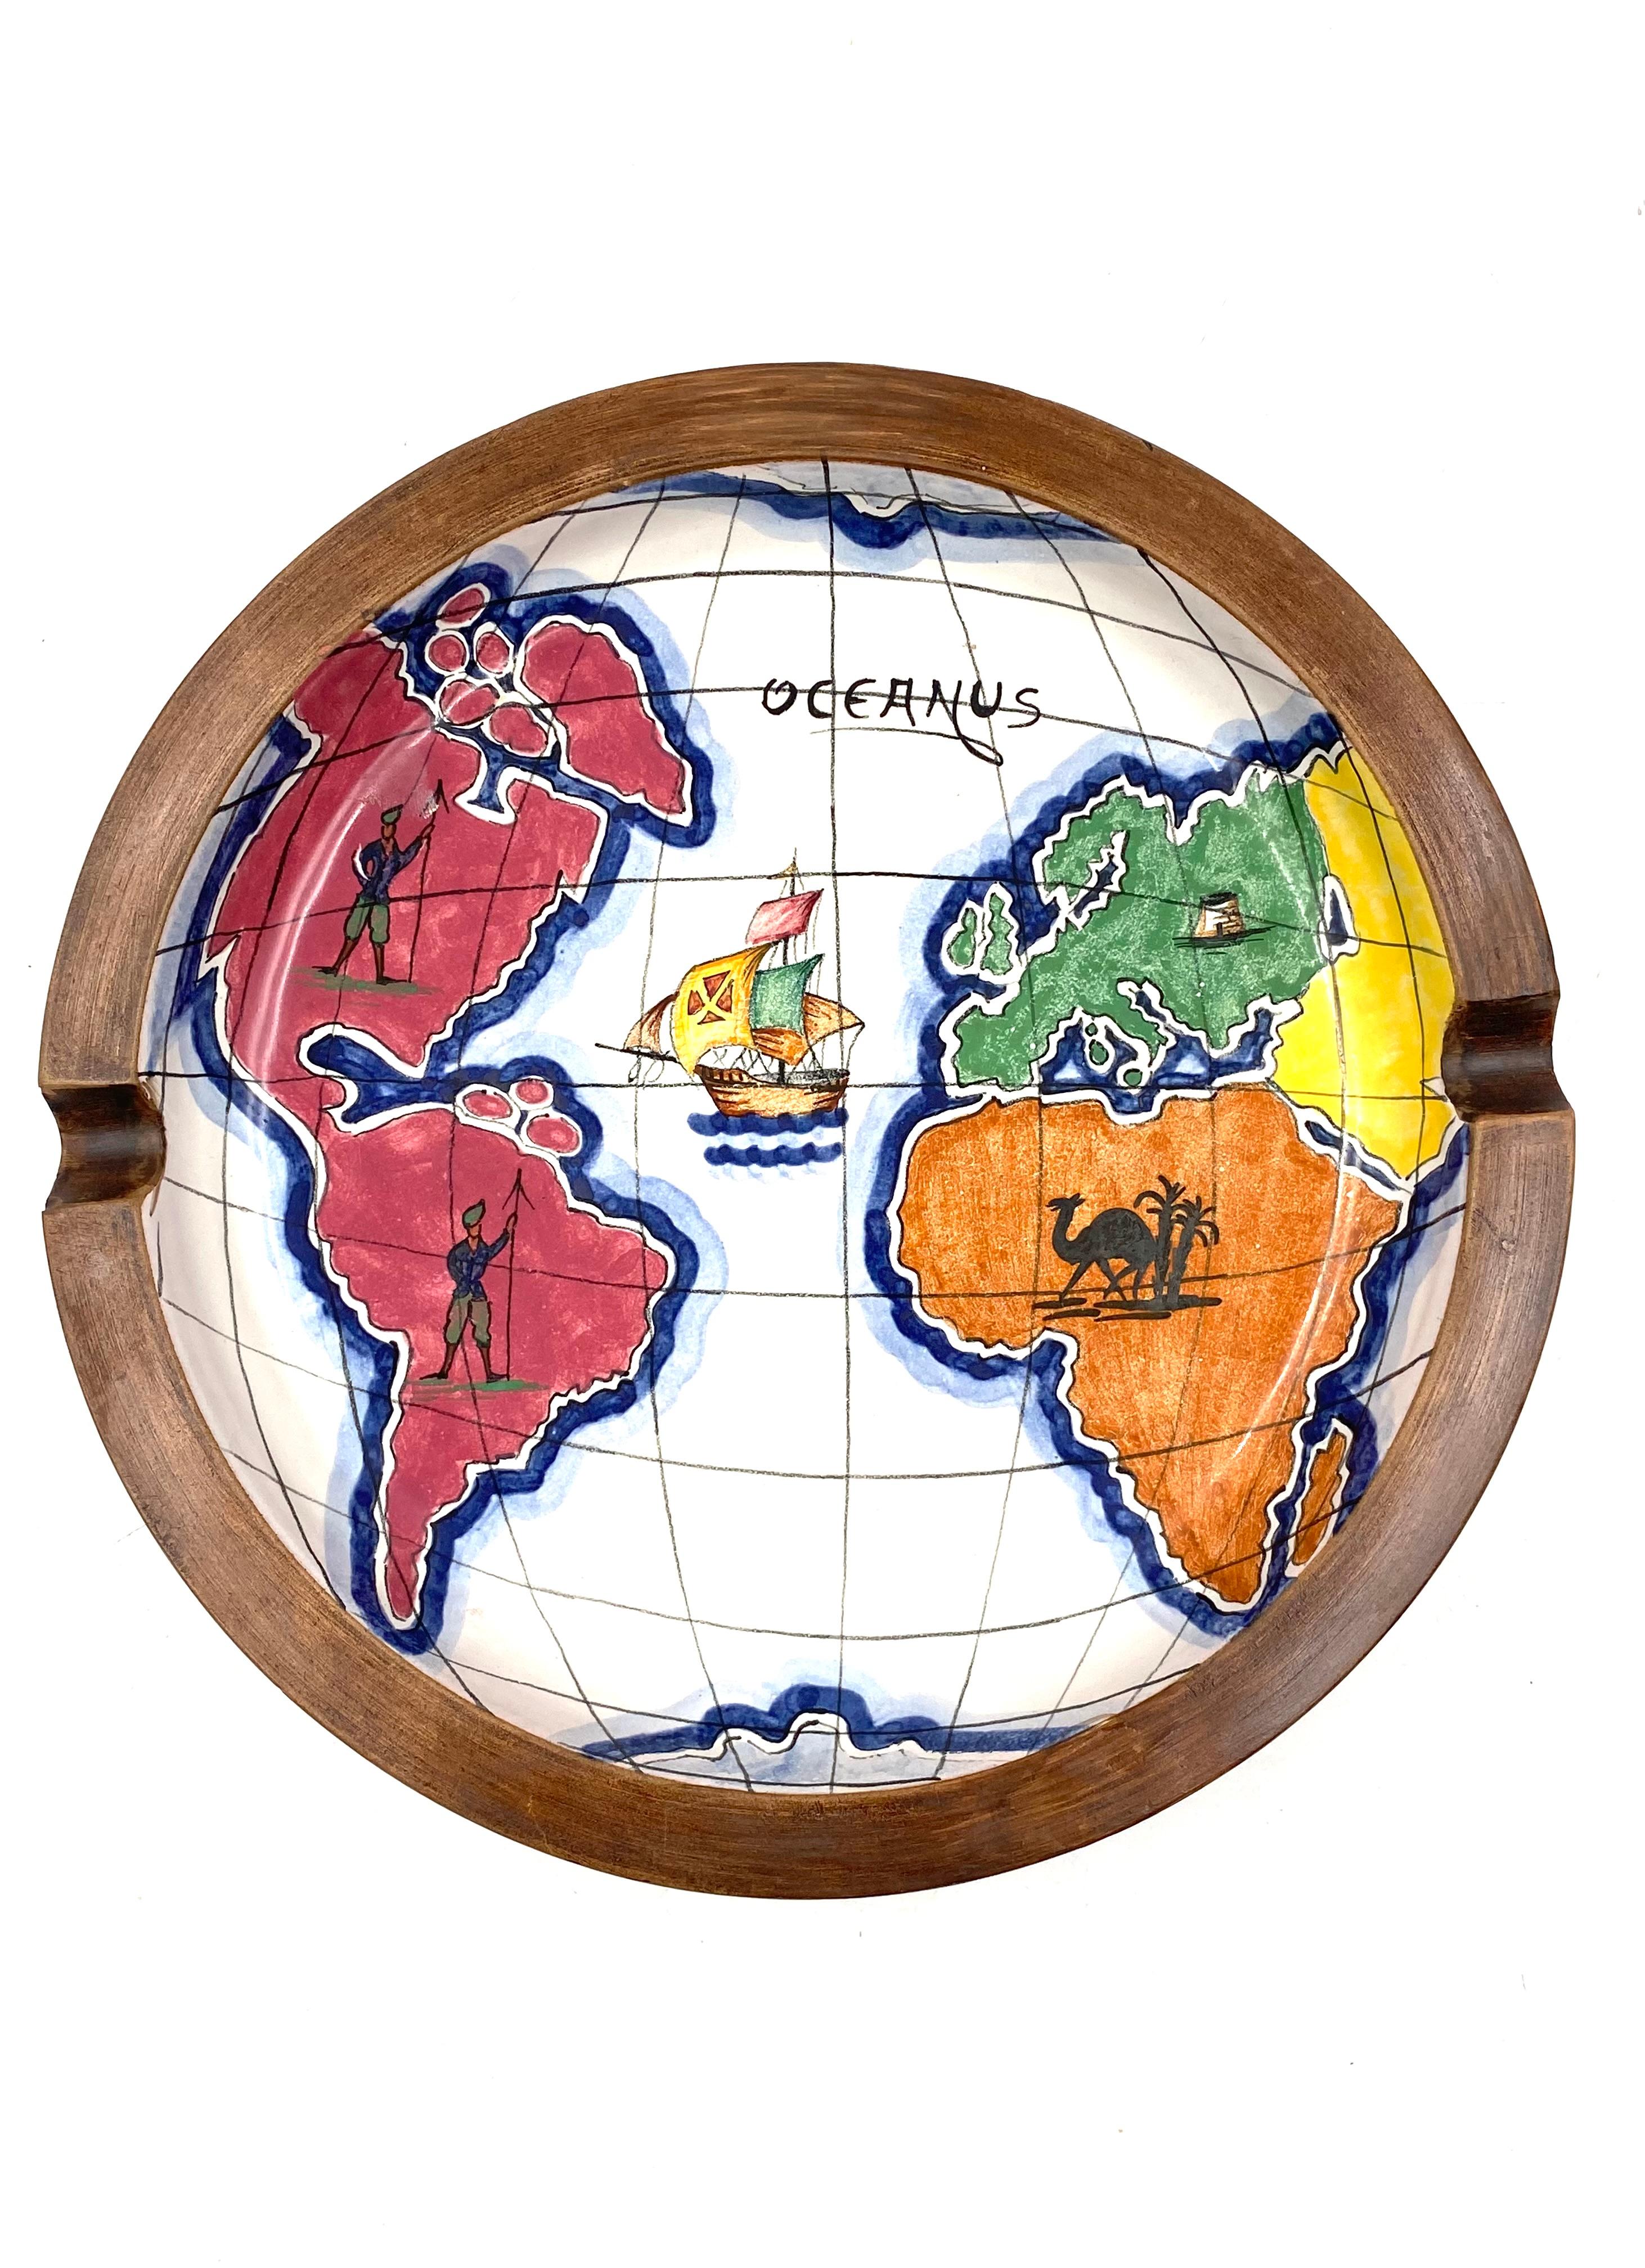 Polychrome ceramic world map catchall / ashtray

Zaccagnini Italy 1940s

Zaccagnini mark under the base

Measures: Height 5 cm x 25,5 cm diameter.

Conditions: excellent consistent with age and use. No defects.